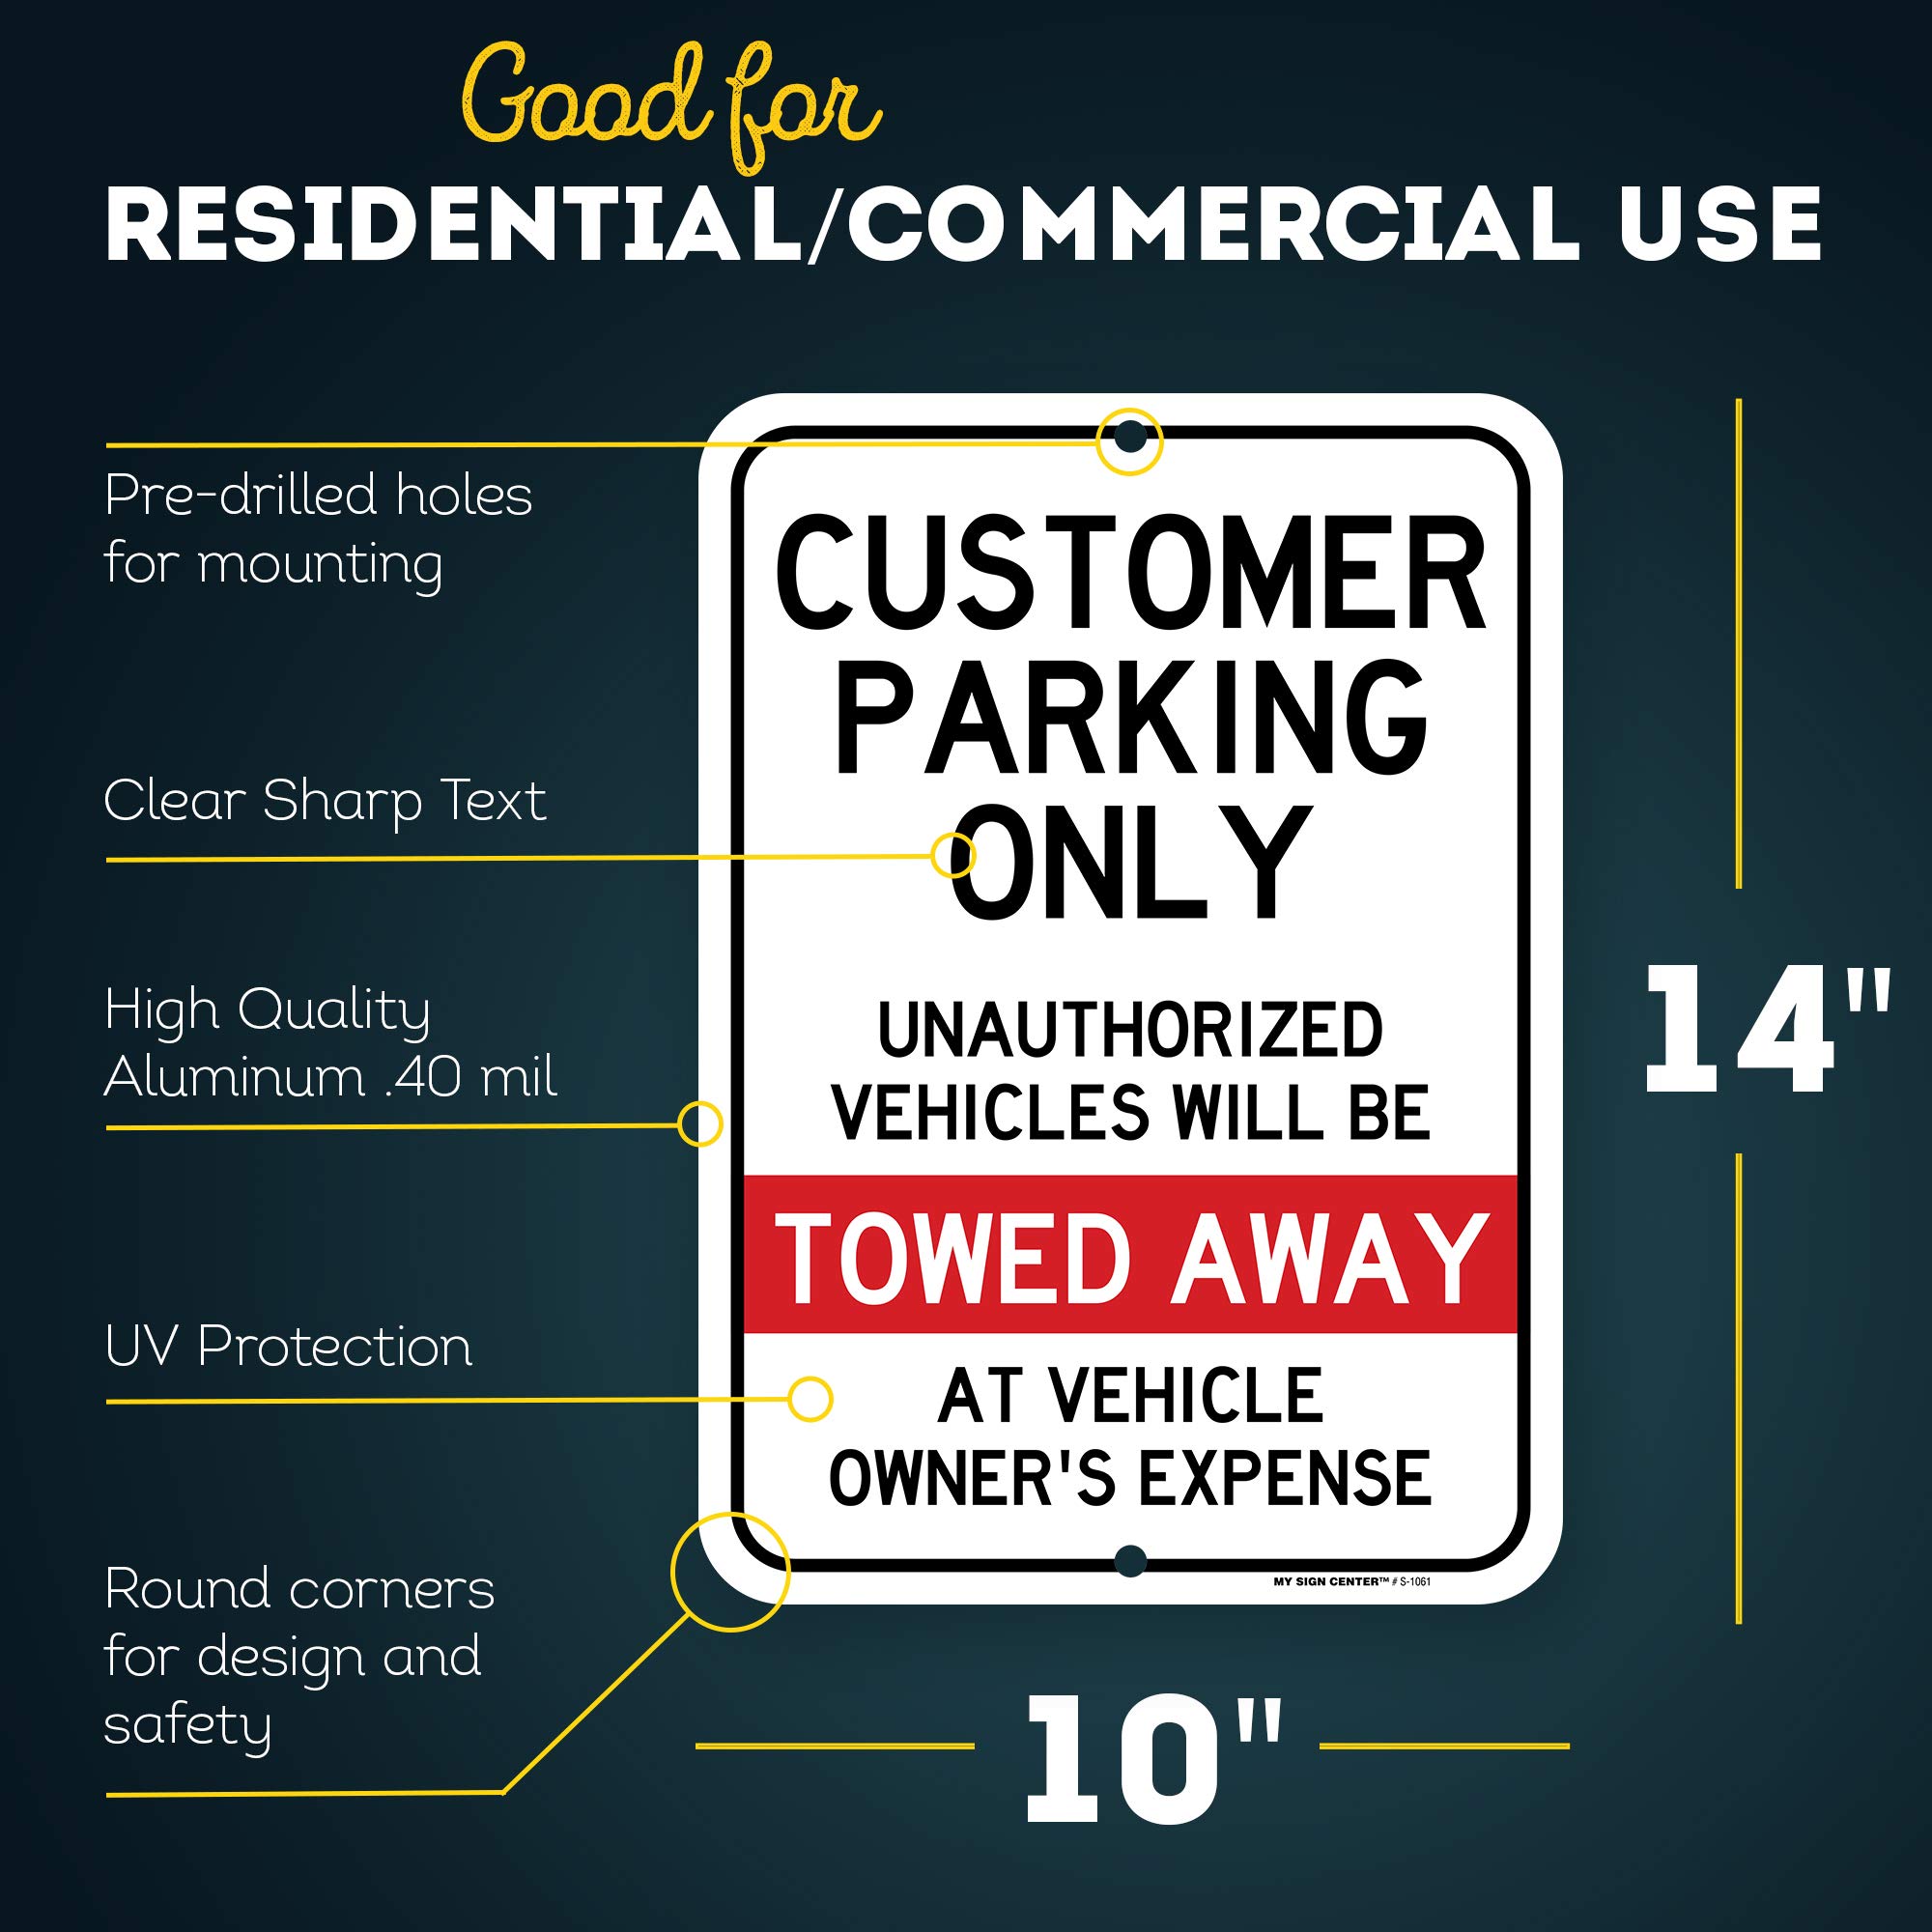 Customer Parking Only Unauthorized Vehicles Will Be Towed Away At Vehicle Owner's Expense Sign, 10" x 14" 0.40 Aluminum, Fade Resistance, Indoor/Outdoor Use, USA MADE By My Sign Center